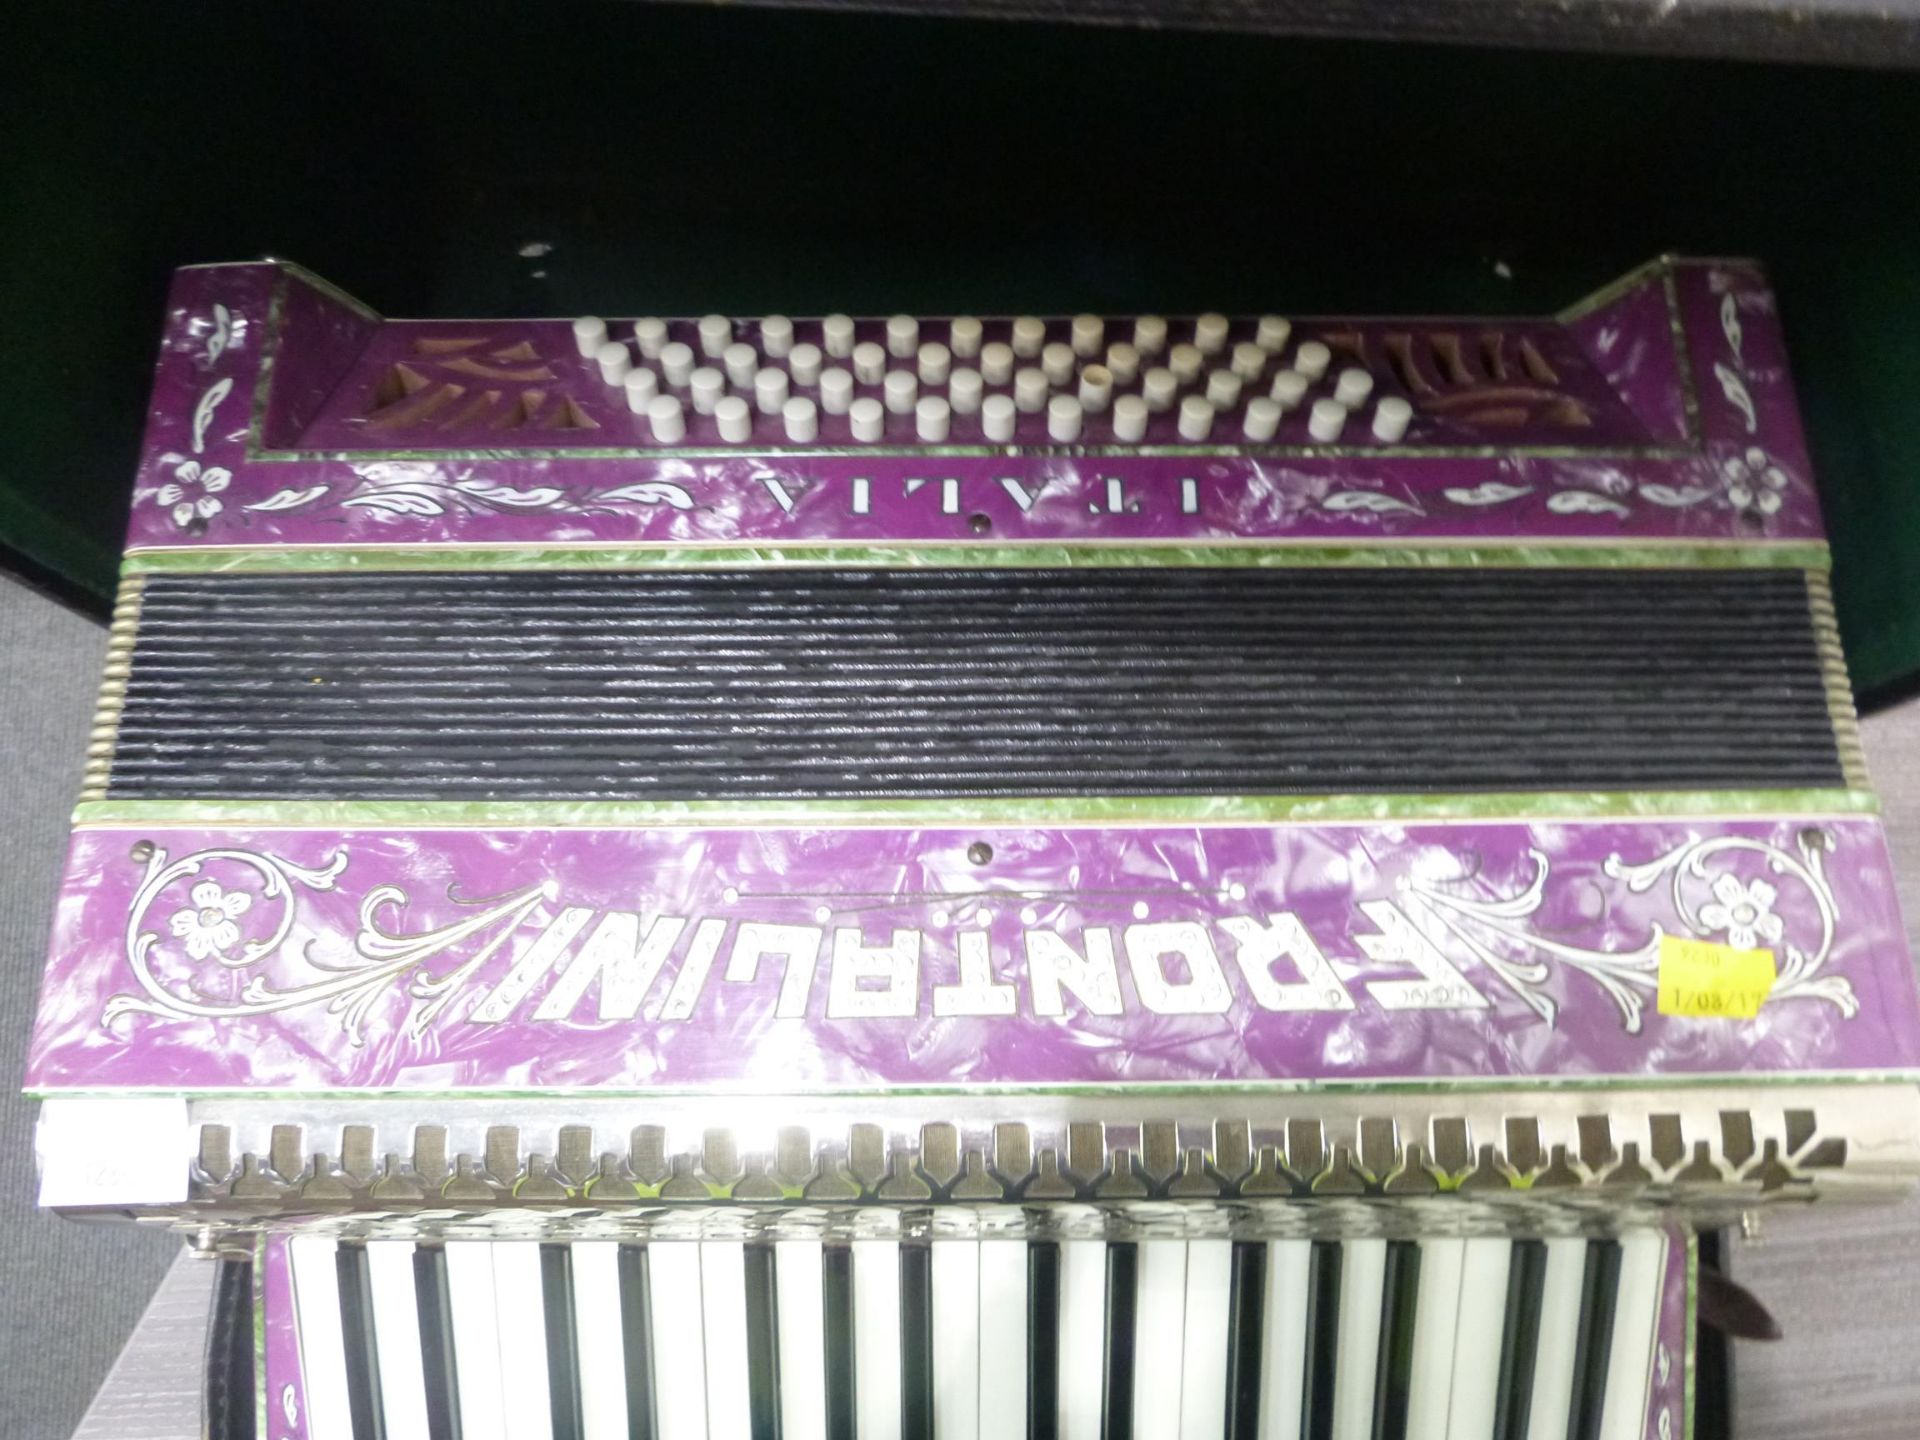 A full size Italia Frontalini Accordian - stamped number 787 in bespoke carry case (est. £50-£100) - Image 2 of 3